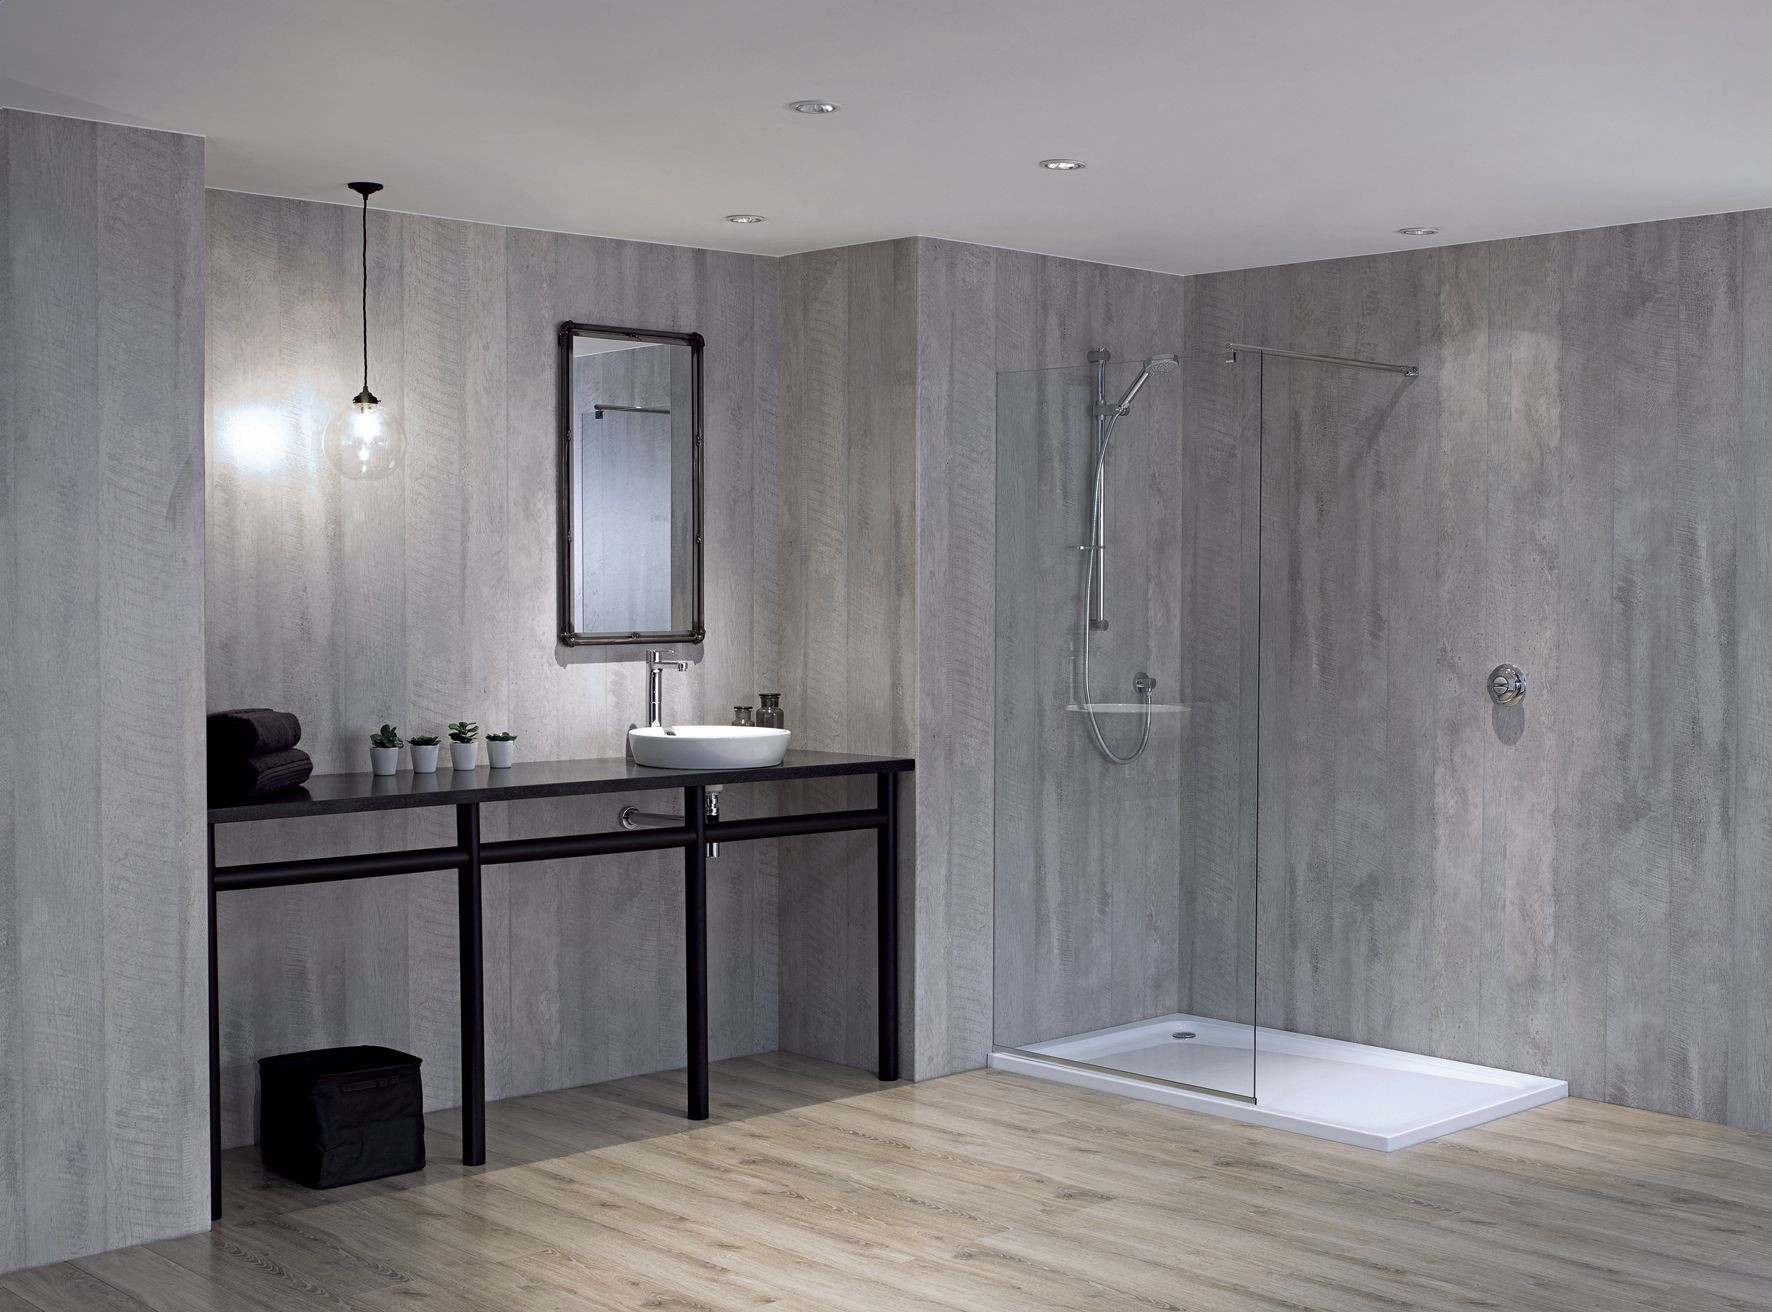 Wall Pictures For Bathroom
 The Benefits of Bathroom Cladding